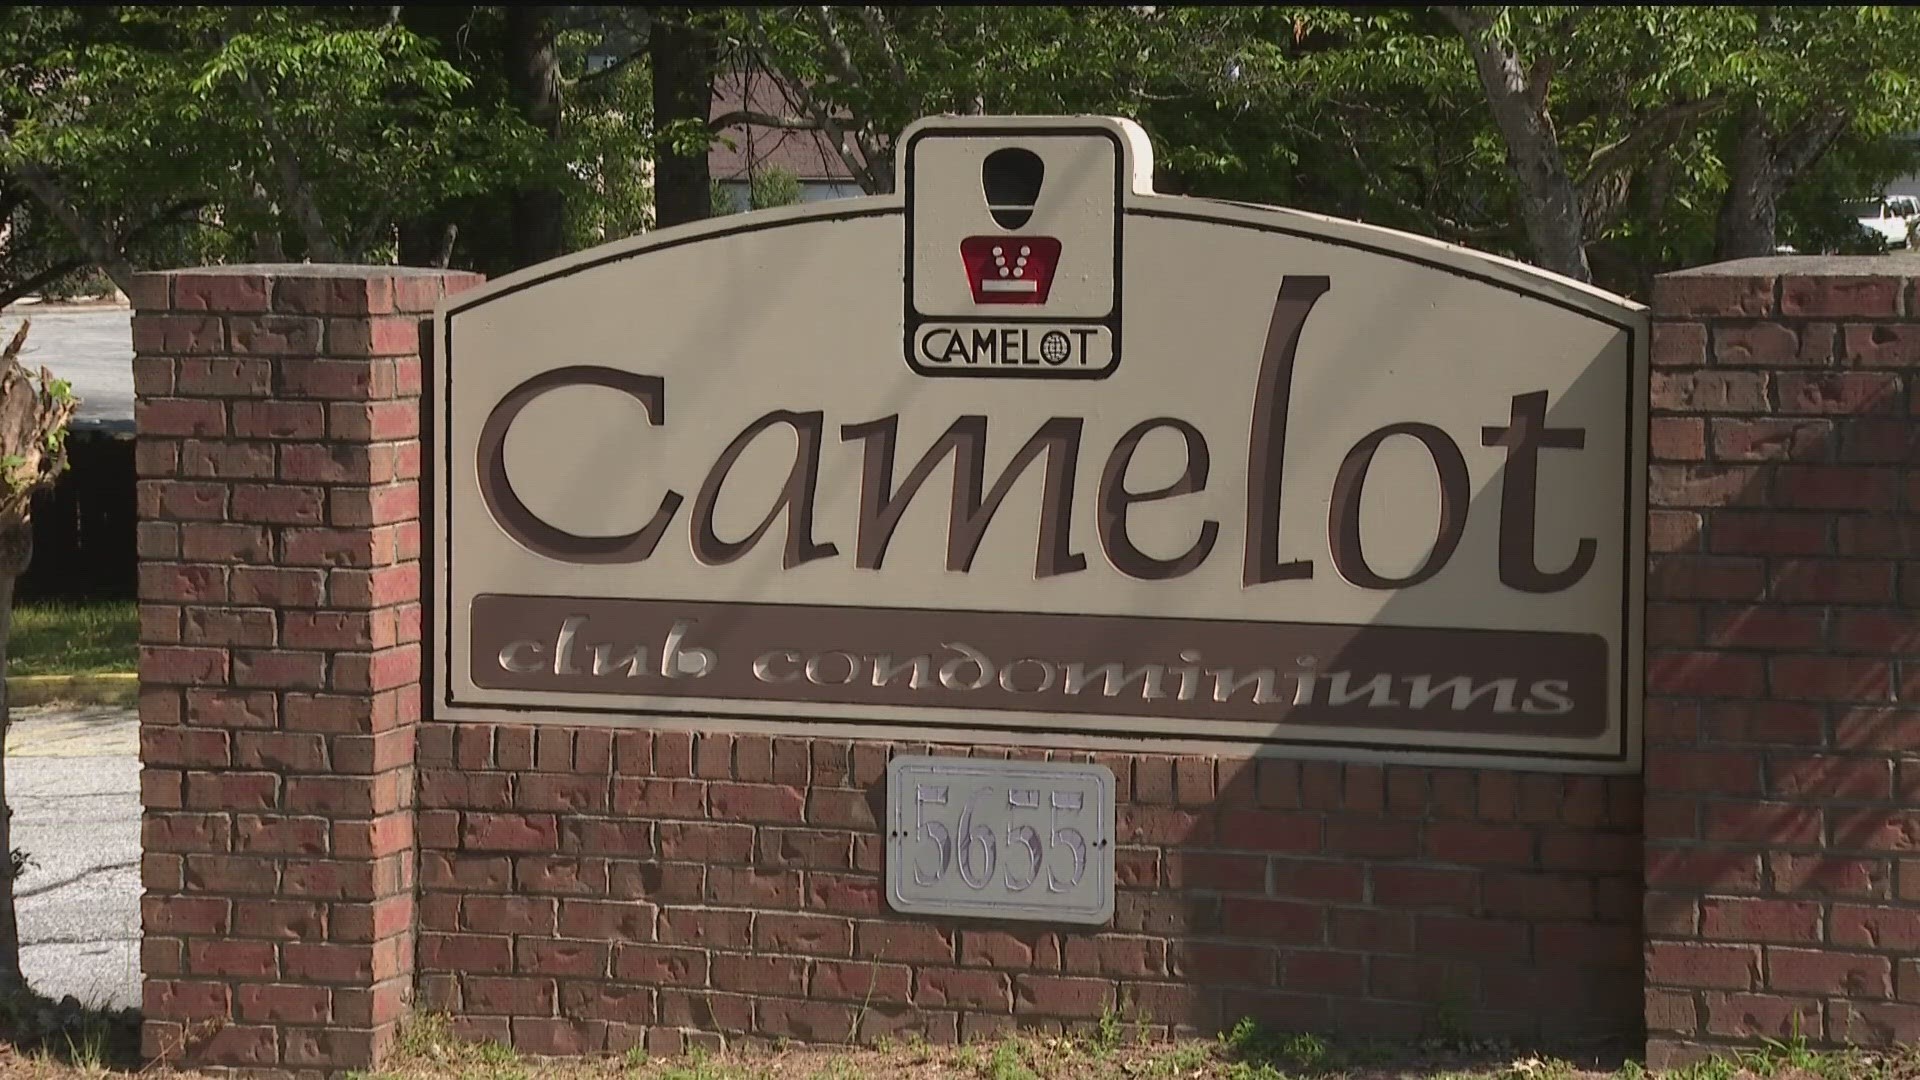 South Fulton's newest council member is focusing on cleaning up the crime and blight along Old National Highway, including the Camelot Condominiums.